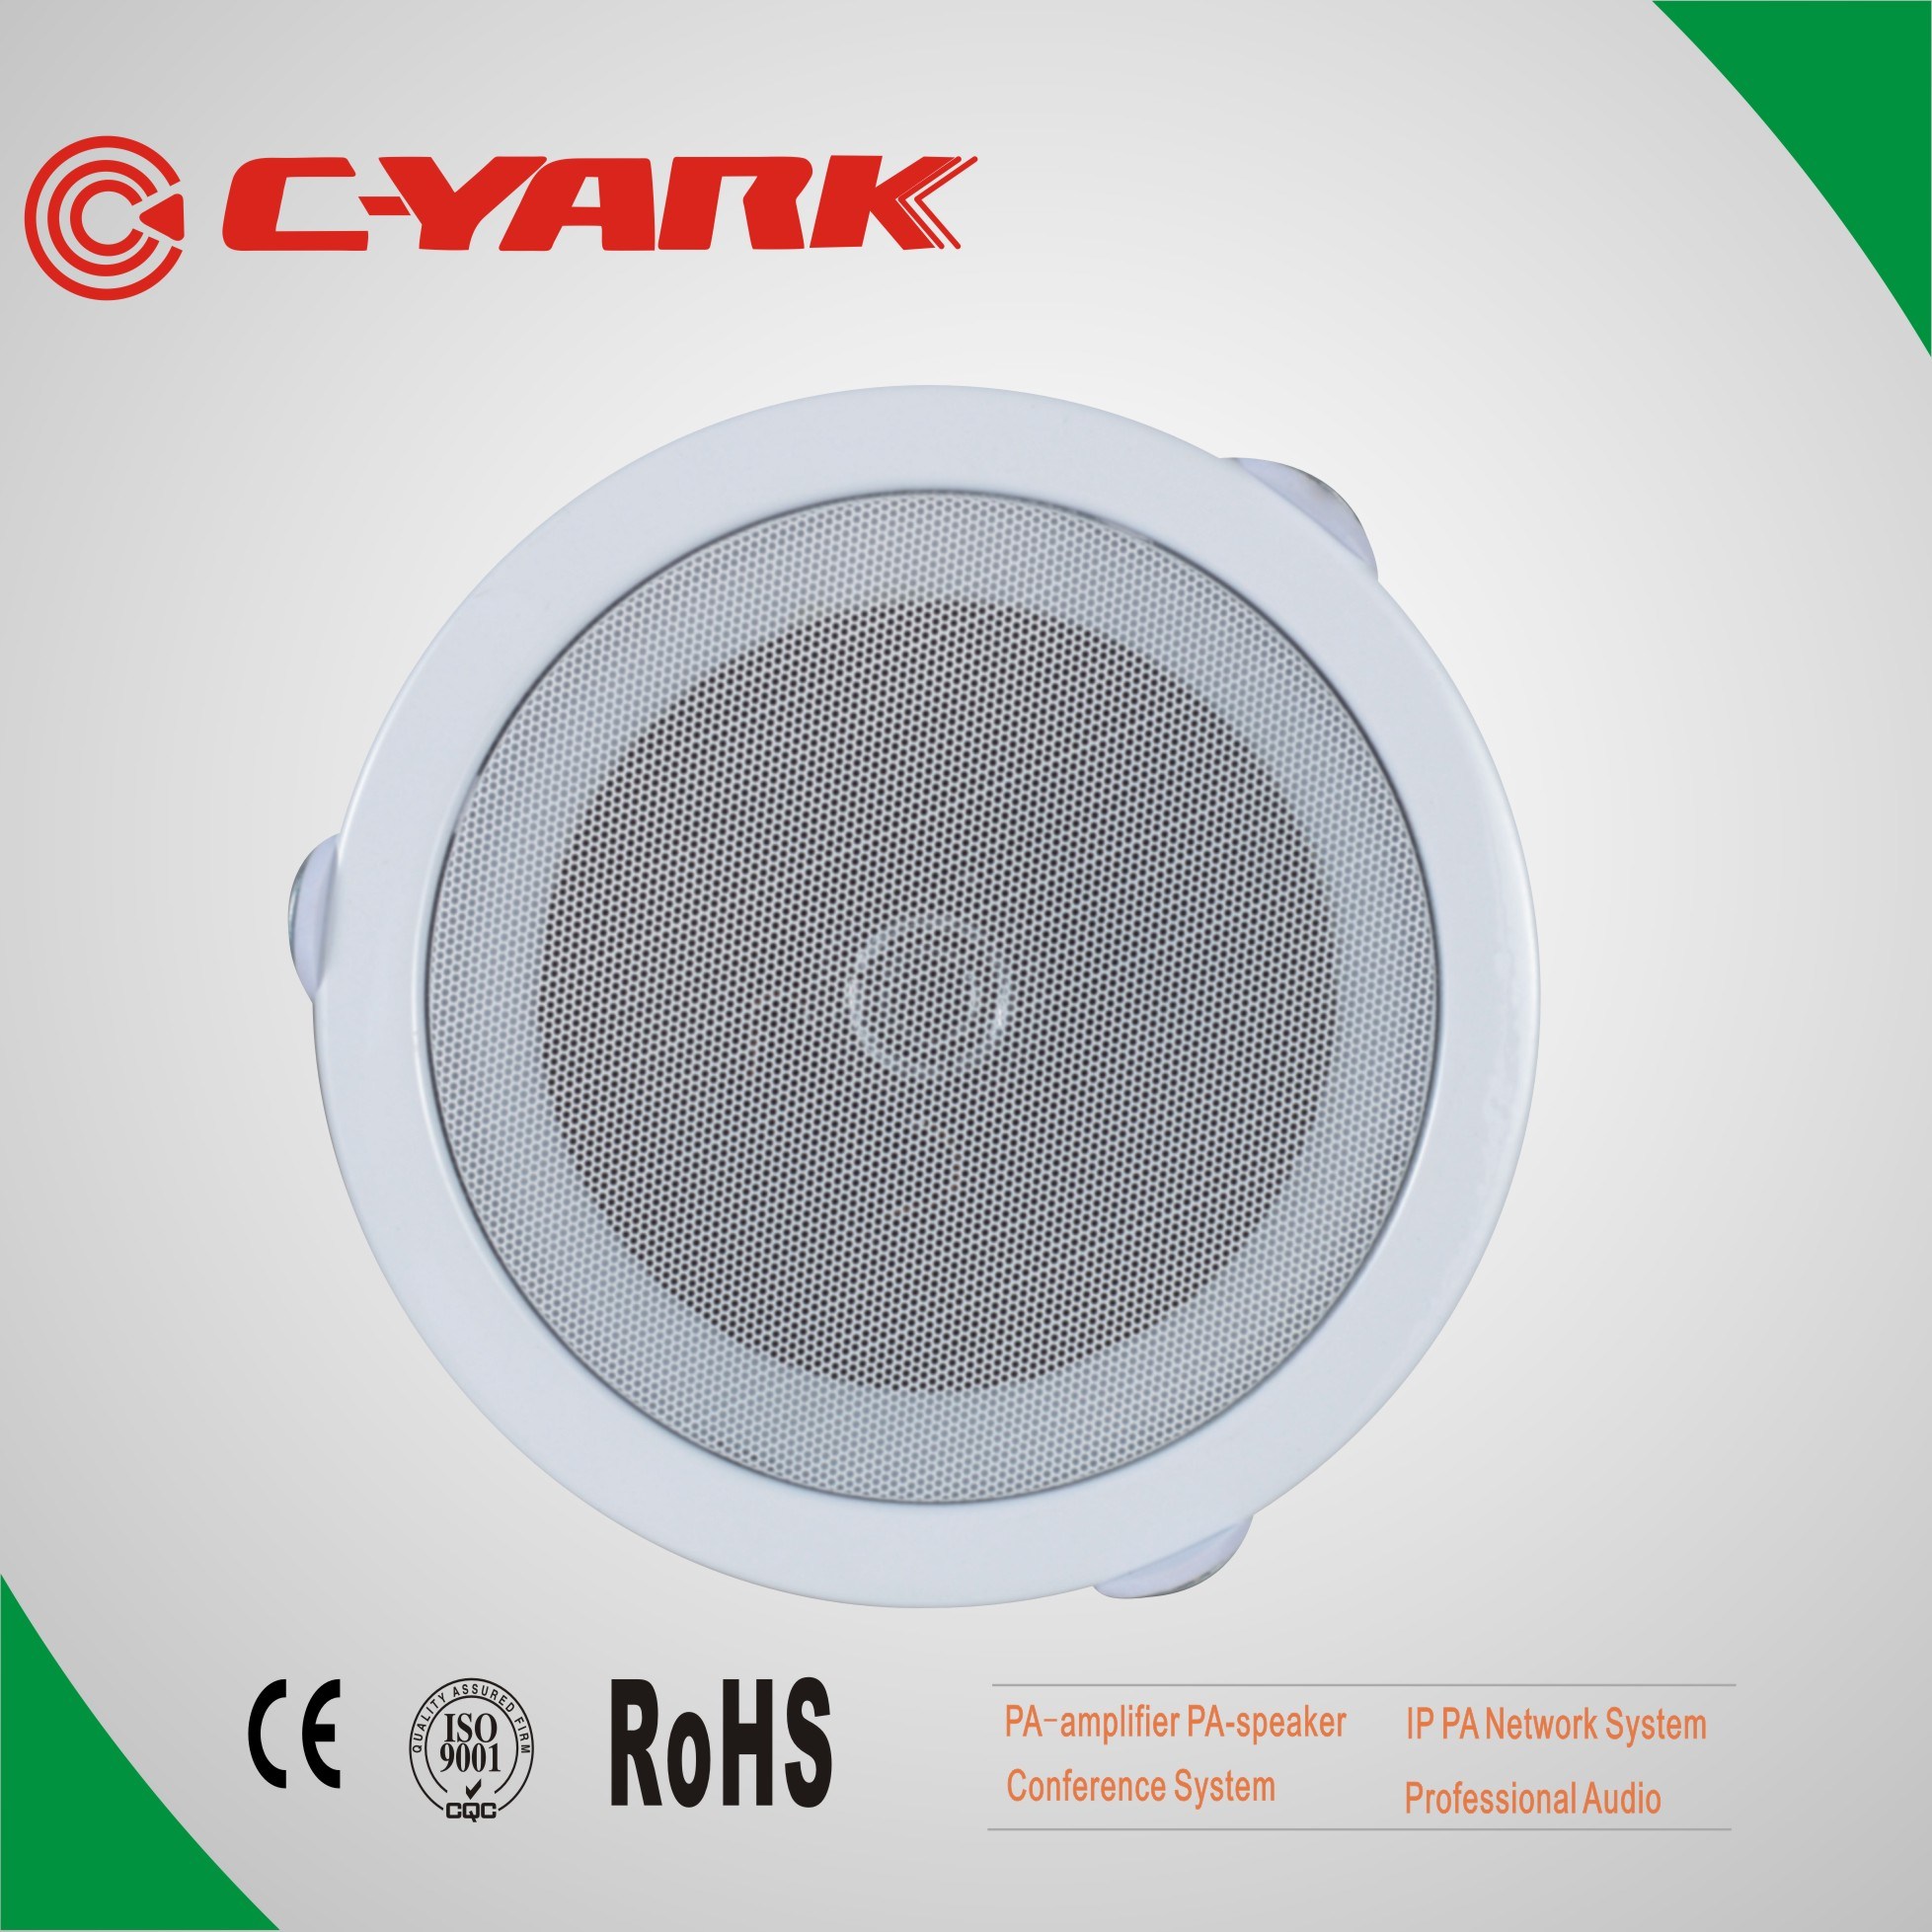 Hot Sell Good Quality Ceiling Speaker with Tweeter for PA